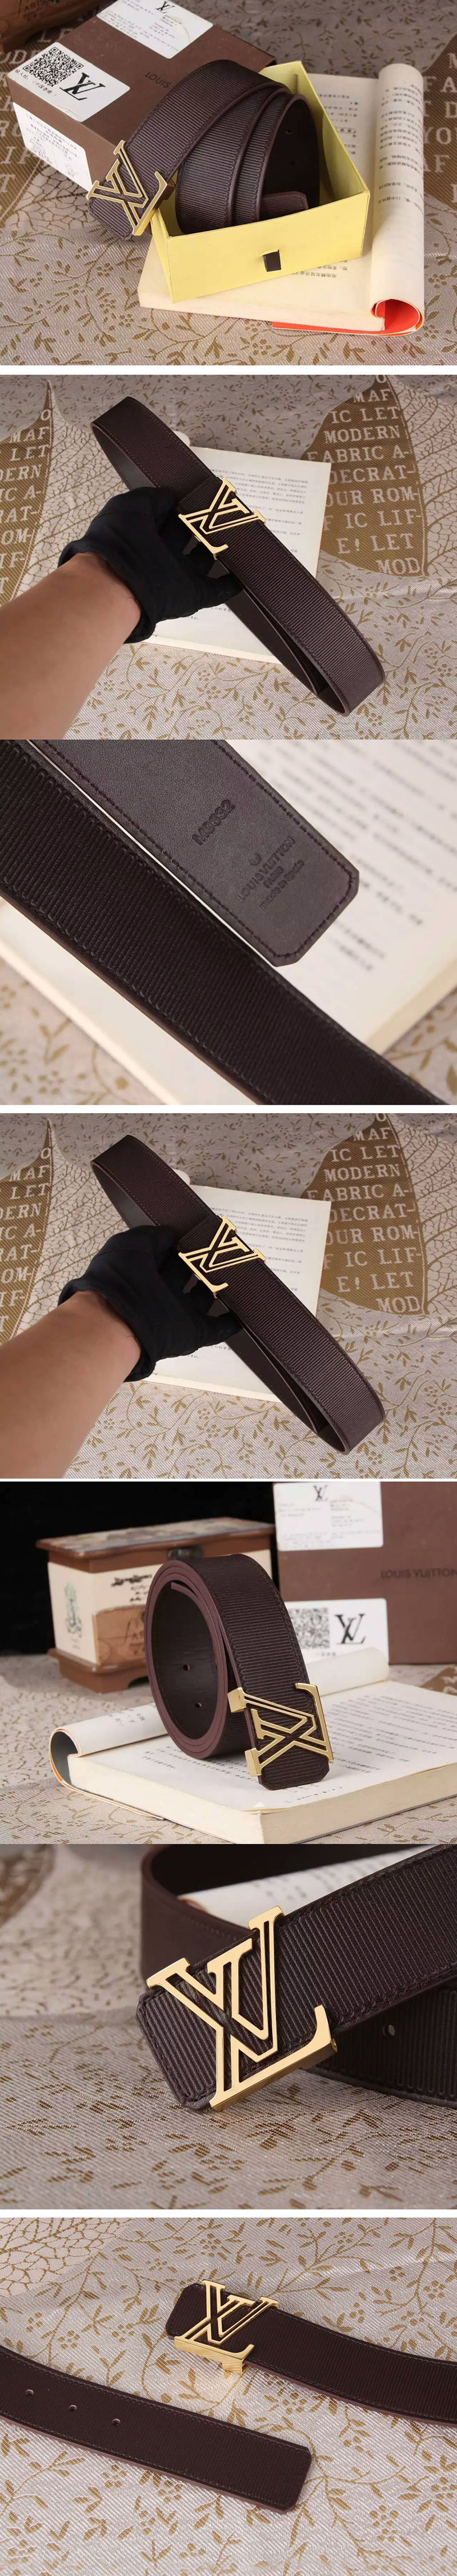 Replica Louis Vuitton Epi Leather Brown Belts With Gold Buckle